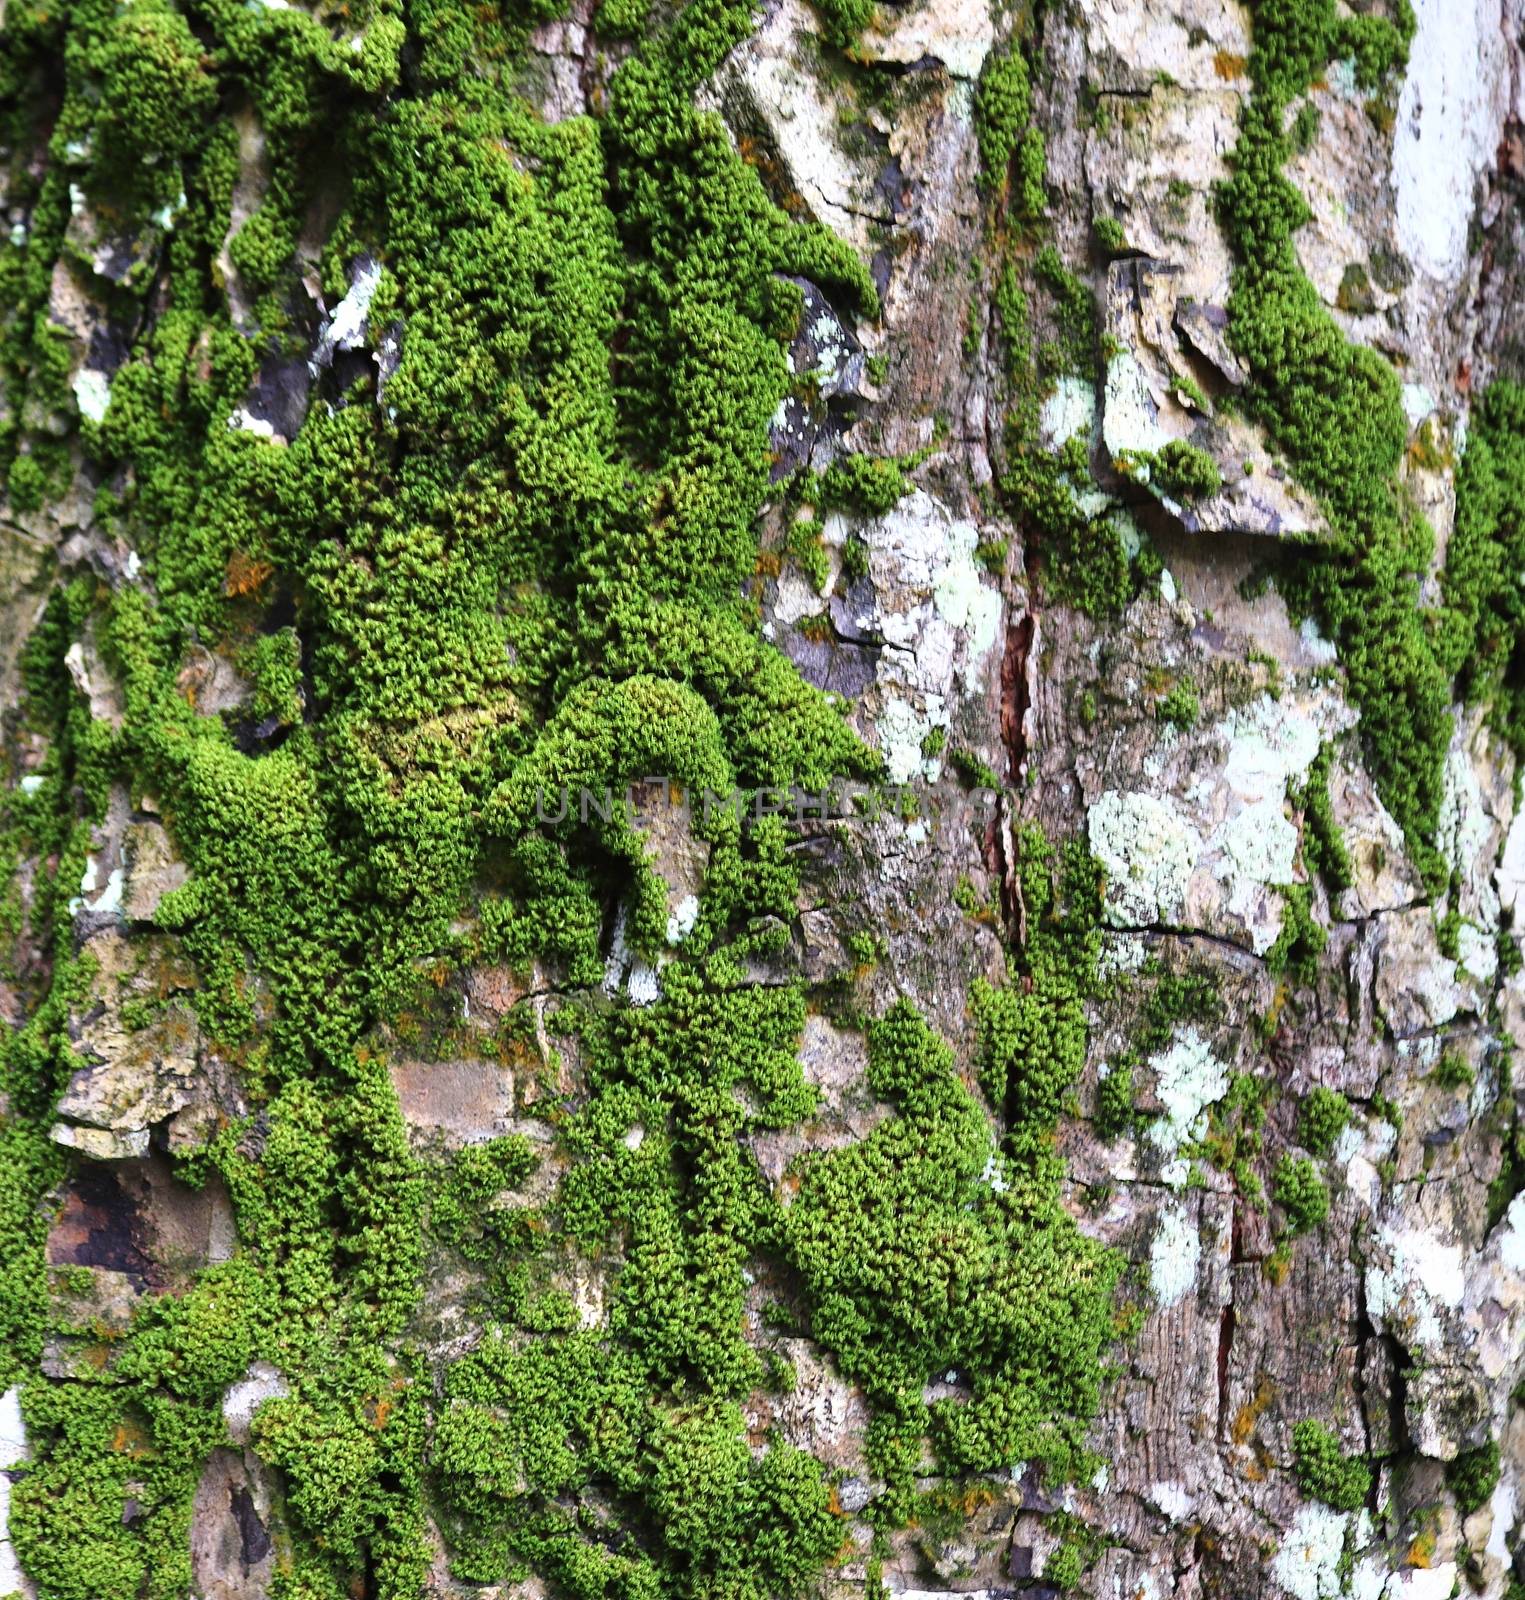 Detailed close up view at moss textures on a forest ground